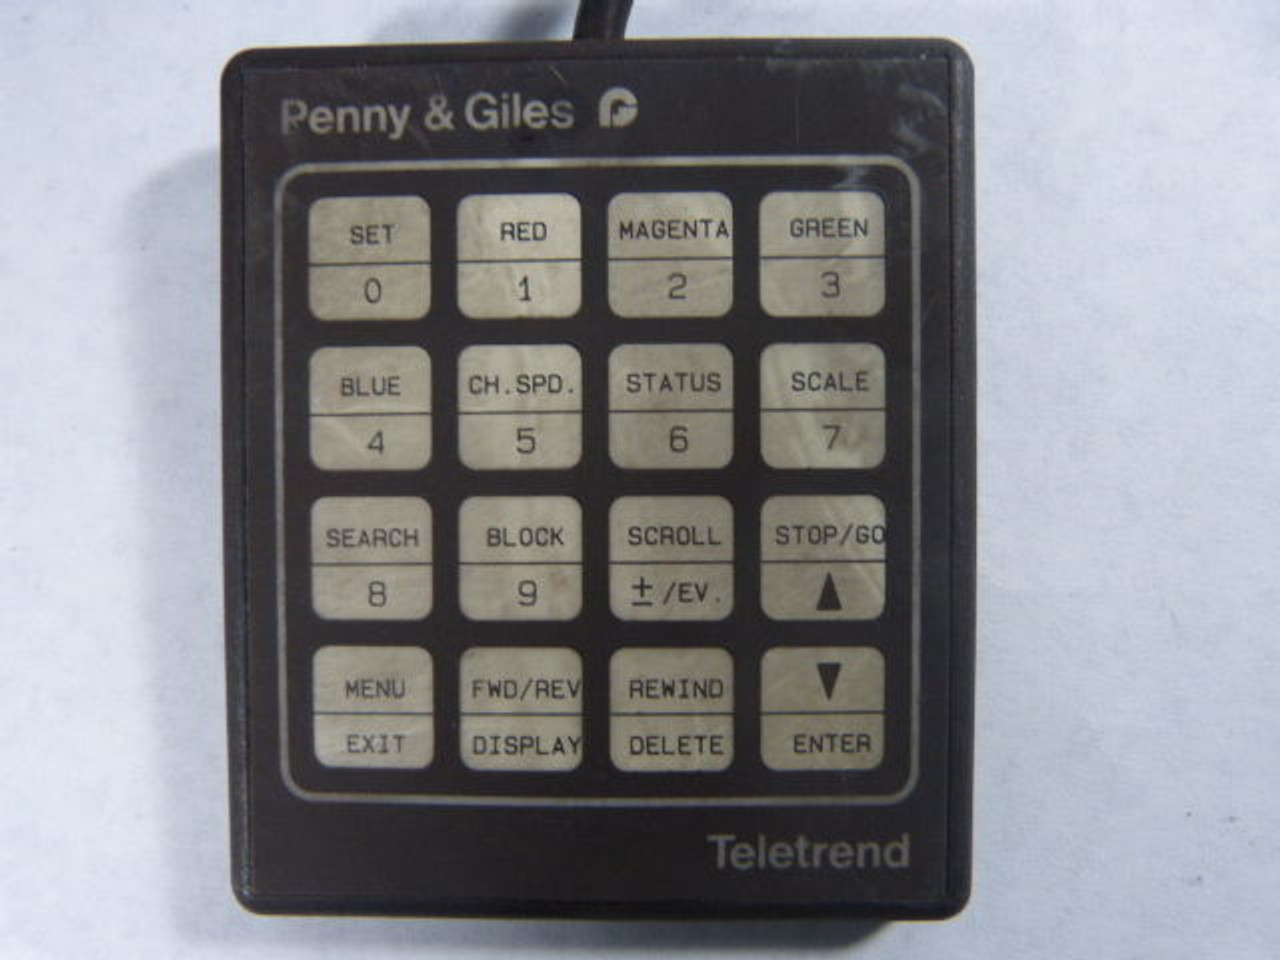 Penny & Giles TELETREND2 Data Recorder Process Instrument w/ Keypad USED